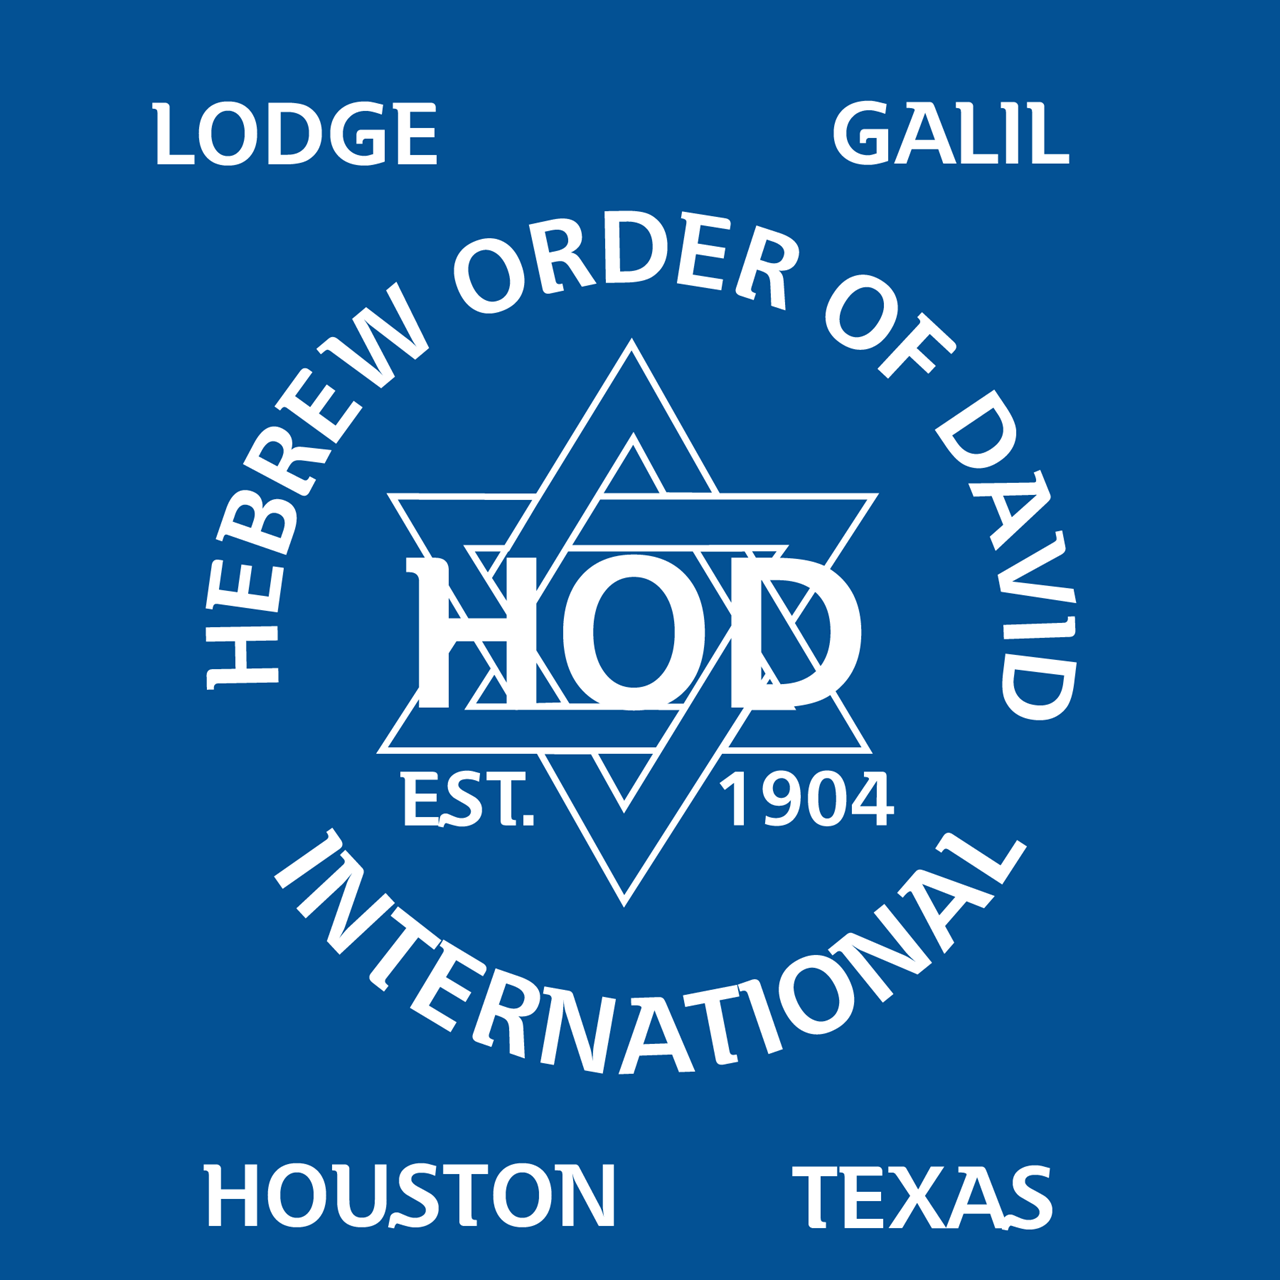 https://www.hodgalil.org/resources/Pictures/HOD%20GALIL%20Logo%20Web.bmp